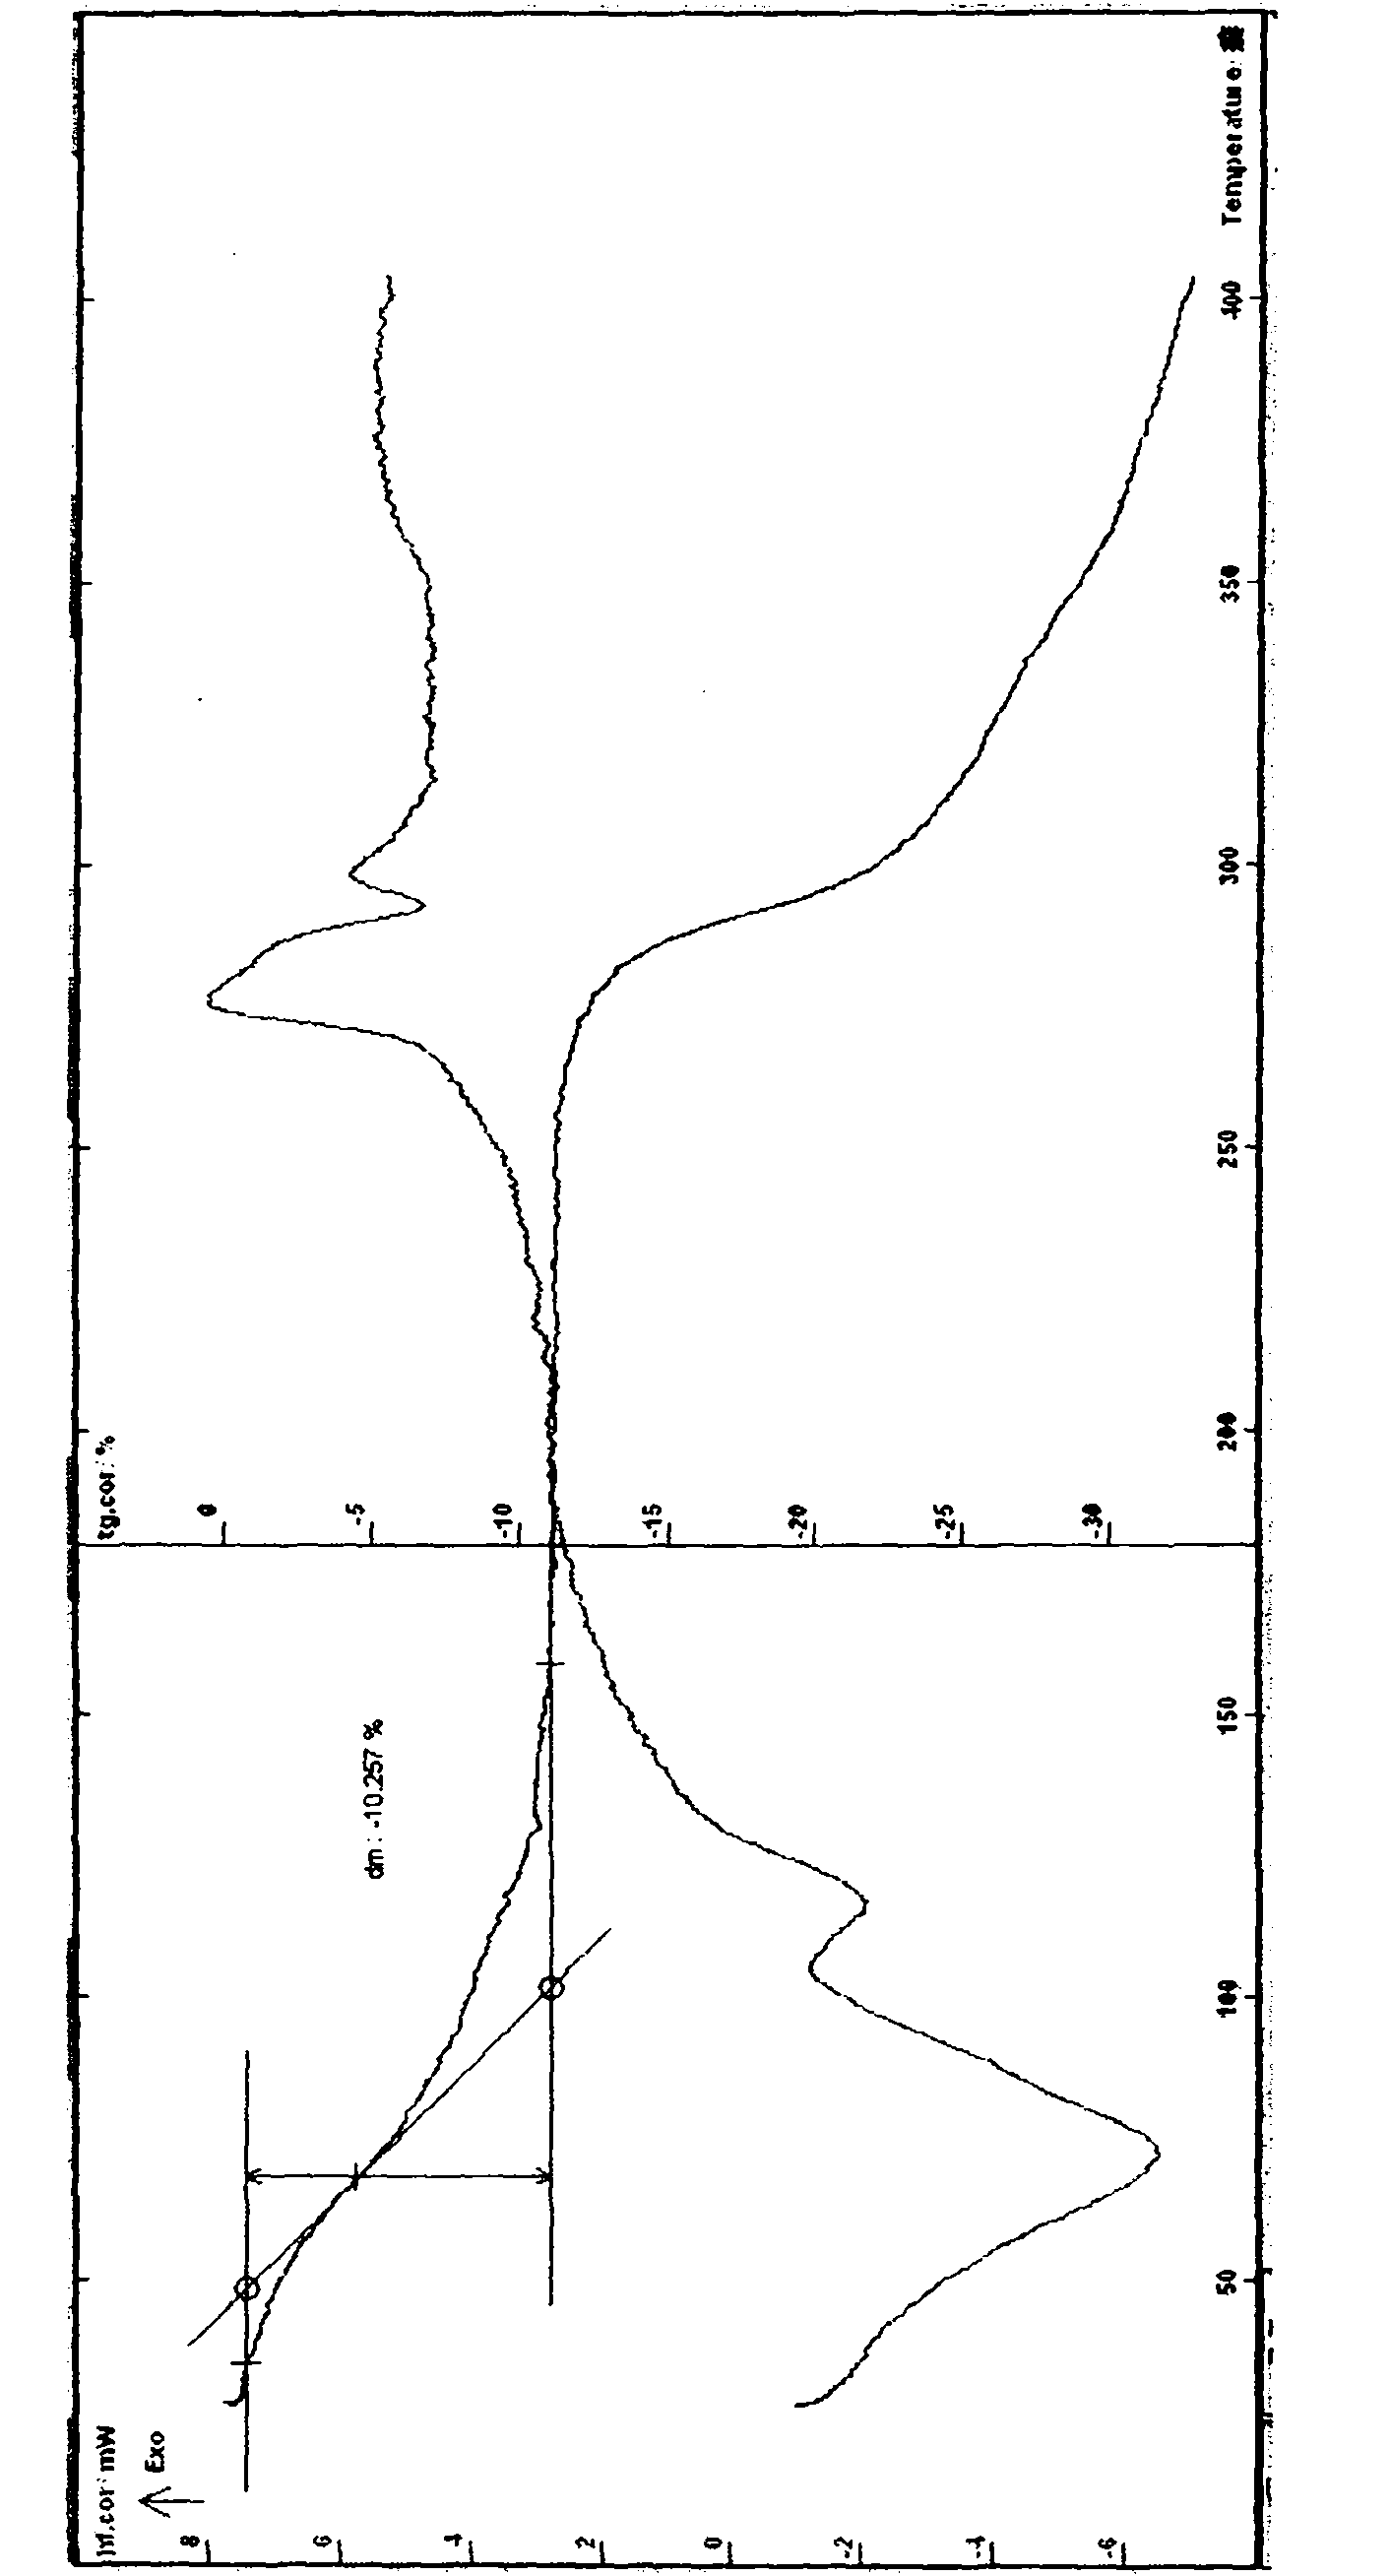 Tanshinone derivative as well as preparation and application thereof